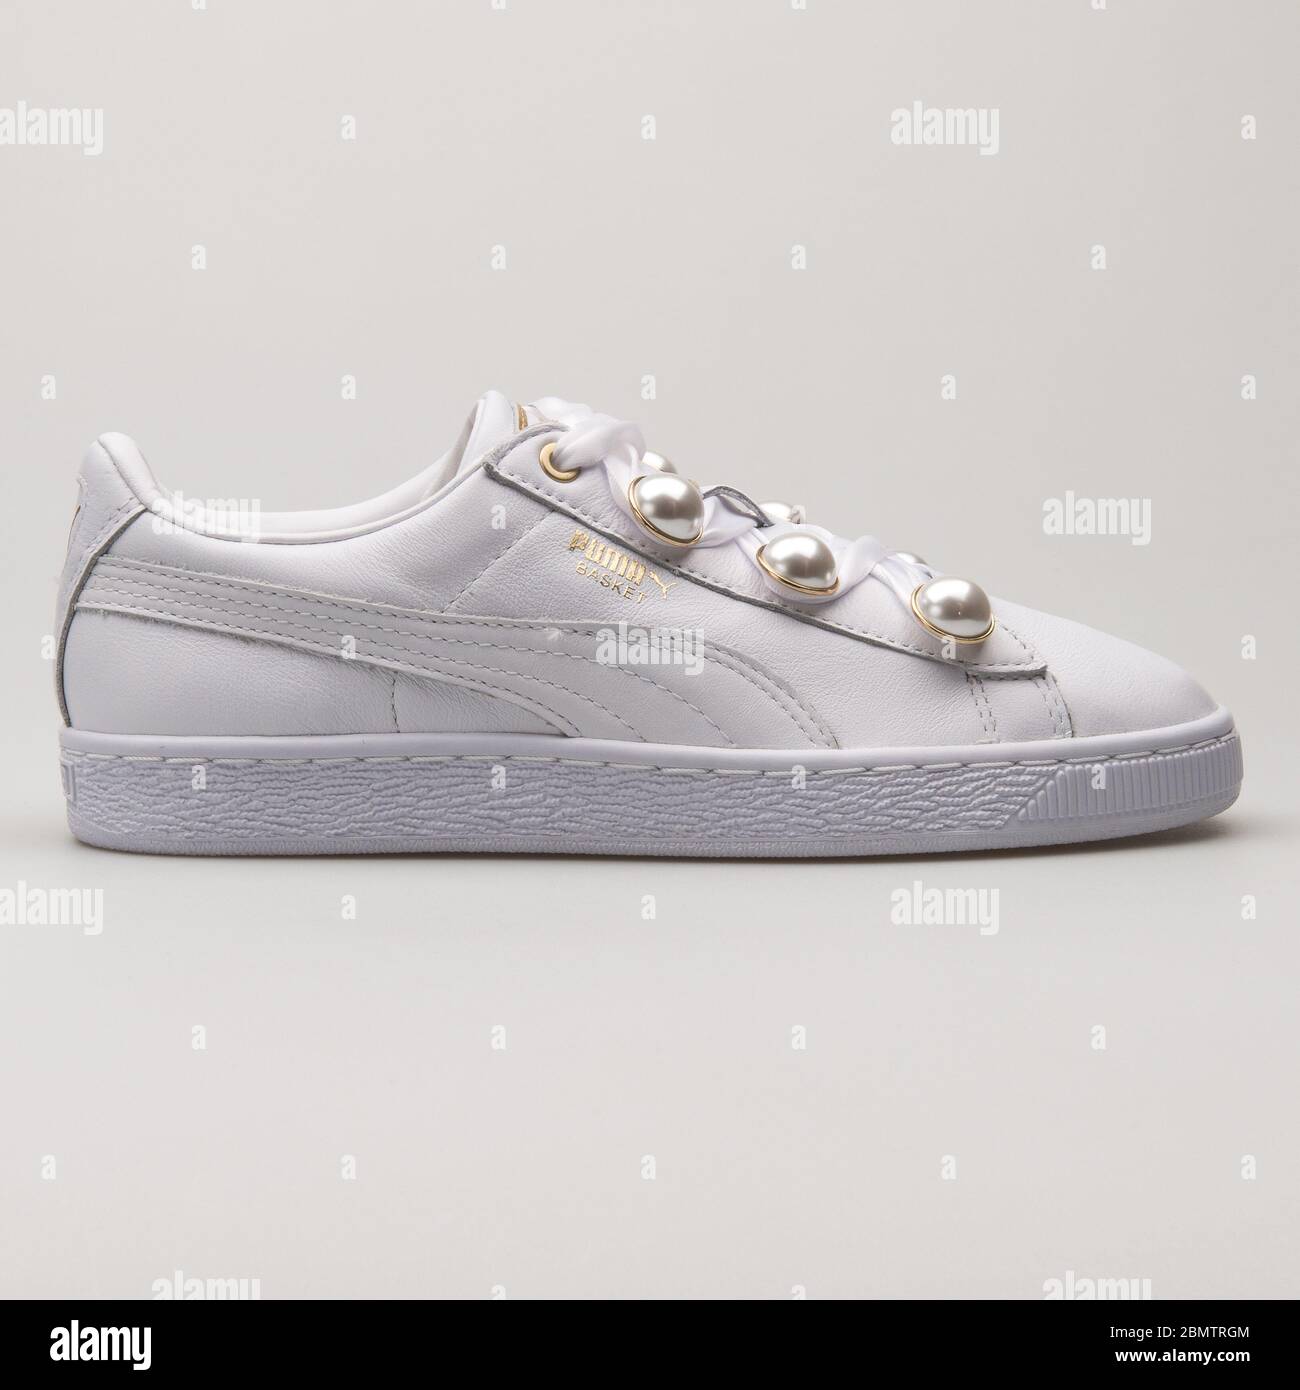 VIENNA, AUSTRIA - MAY 27, 2018: Puma Basket Bling white and gold sneaker on  white background Stock Photo - Alamy